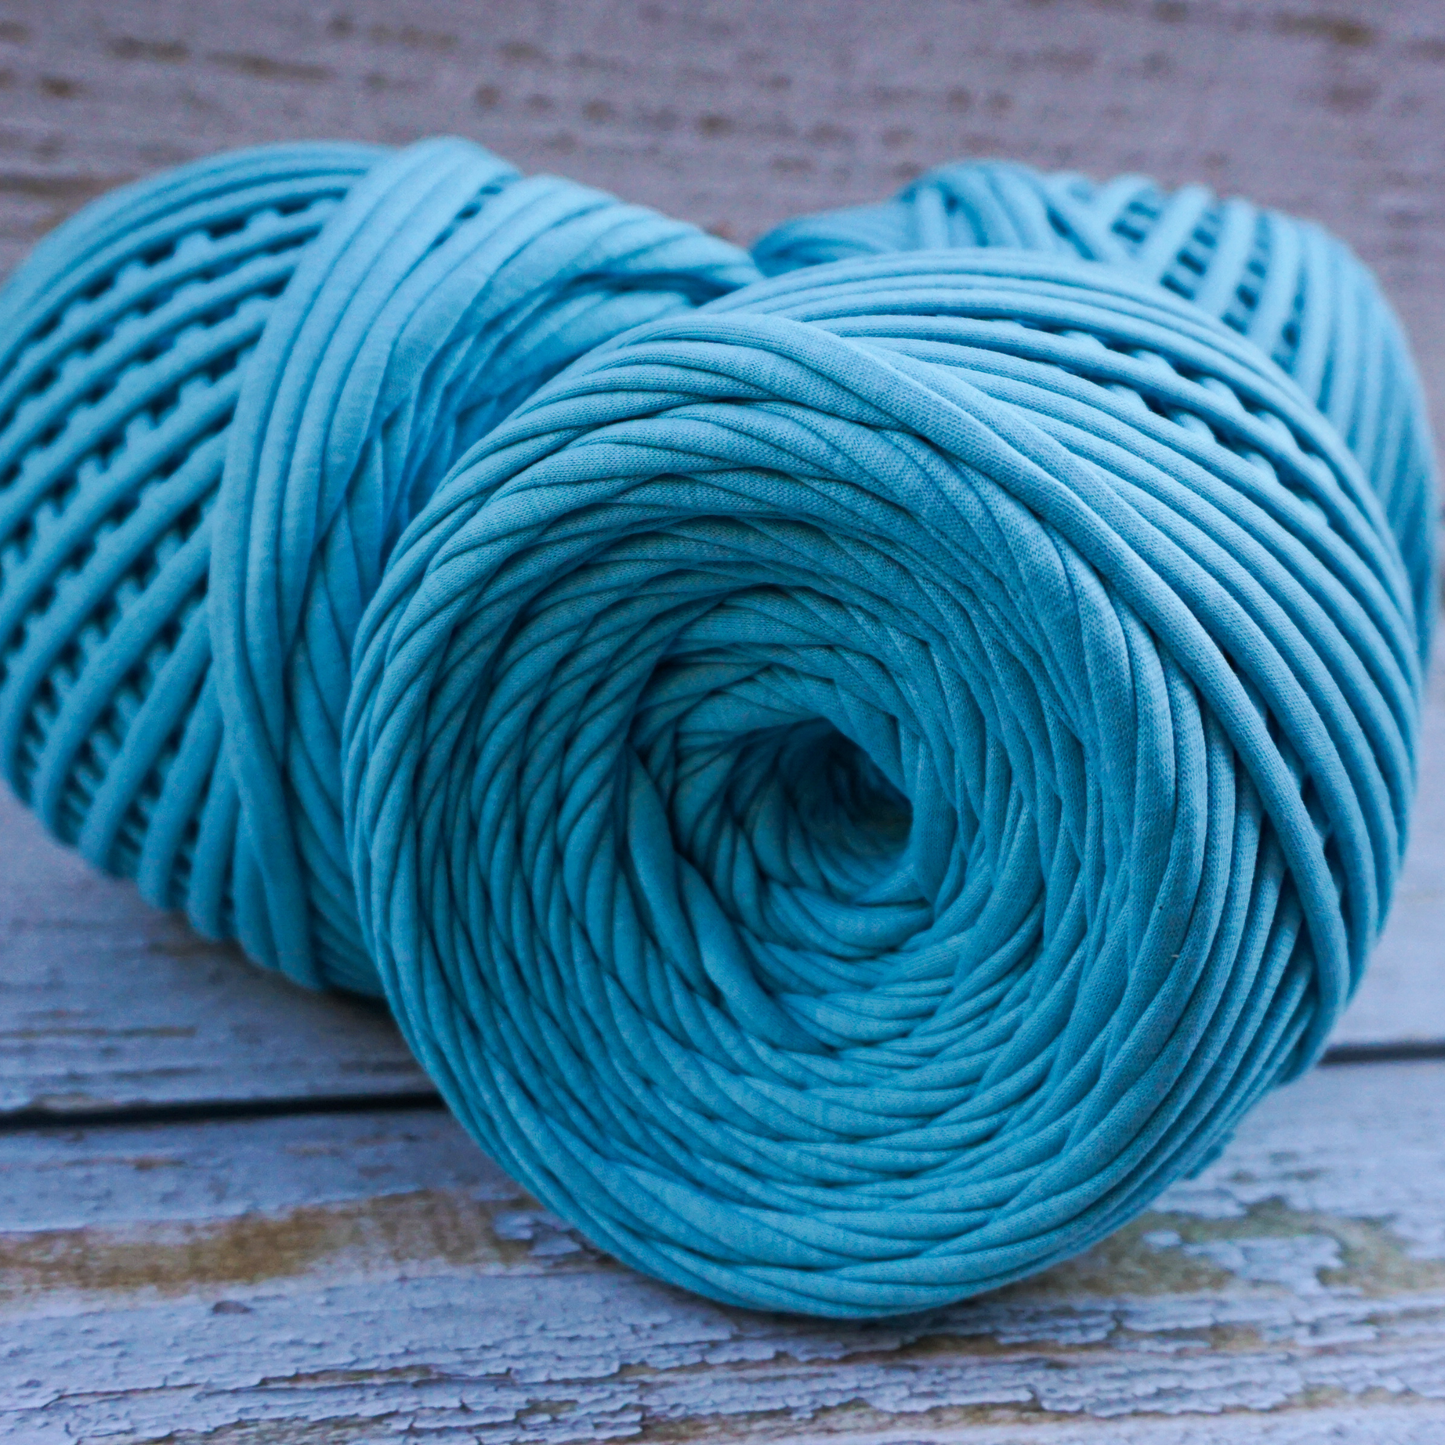 T-shirt yarn for crocheting baskets, bags, rugs and home decor. Ocean weave